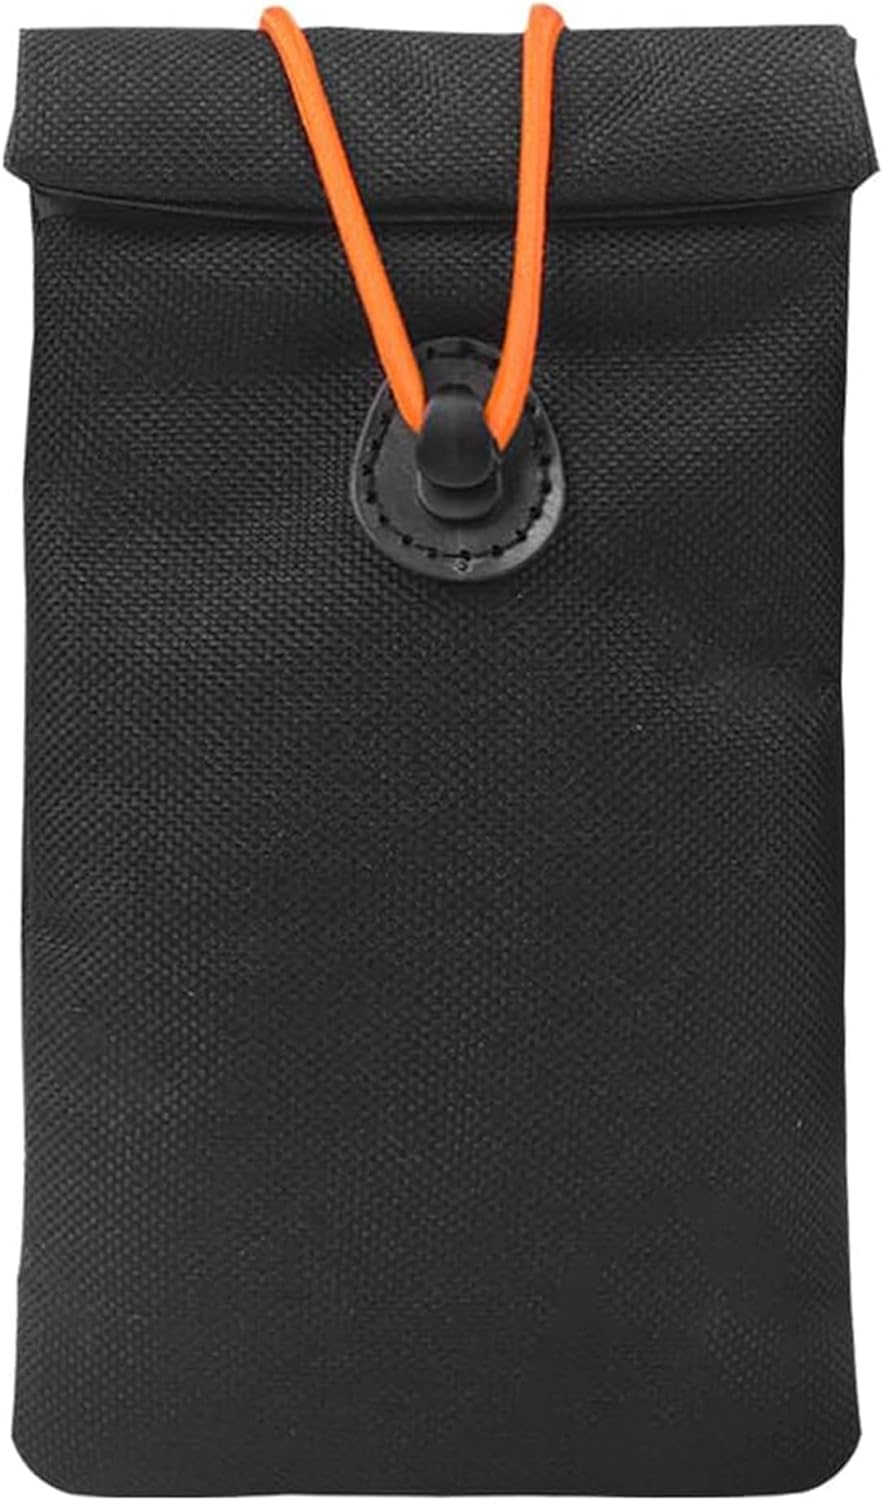  OFFGRID Faraday Bags for Phones - Premium EMP Proof Faraday Bags  - Device Shielding Data Security for Signal Blocking, Anti-Tracking,  Anti-Spying Protection- Black : Automotive